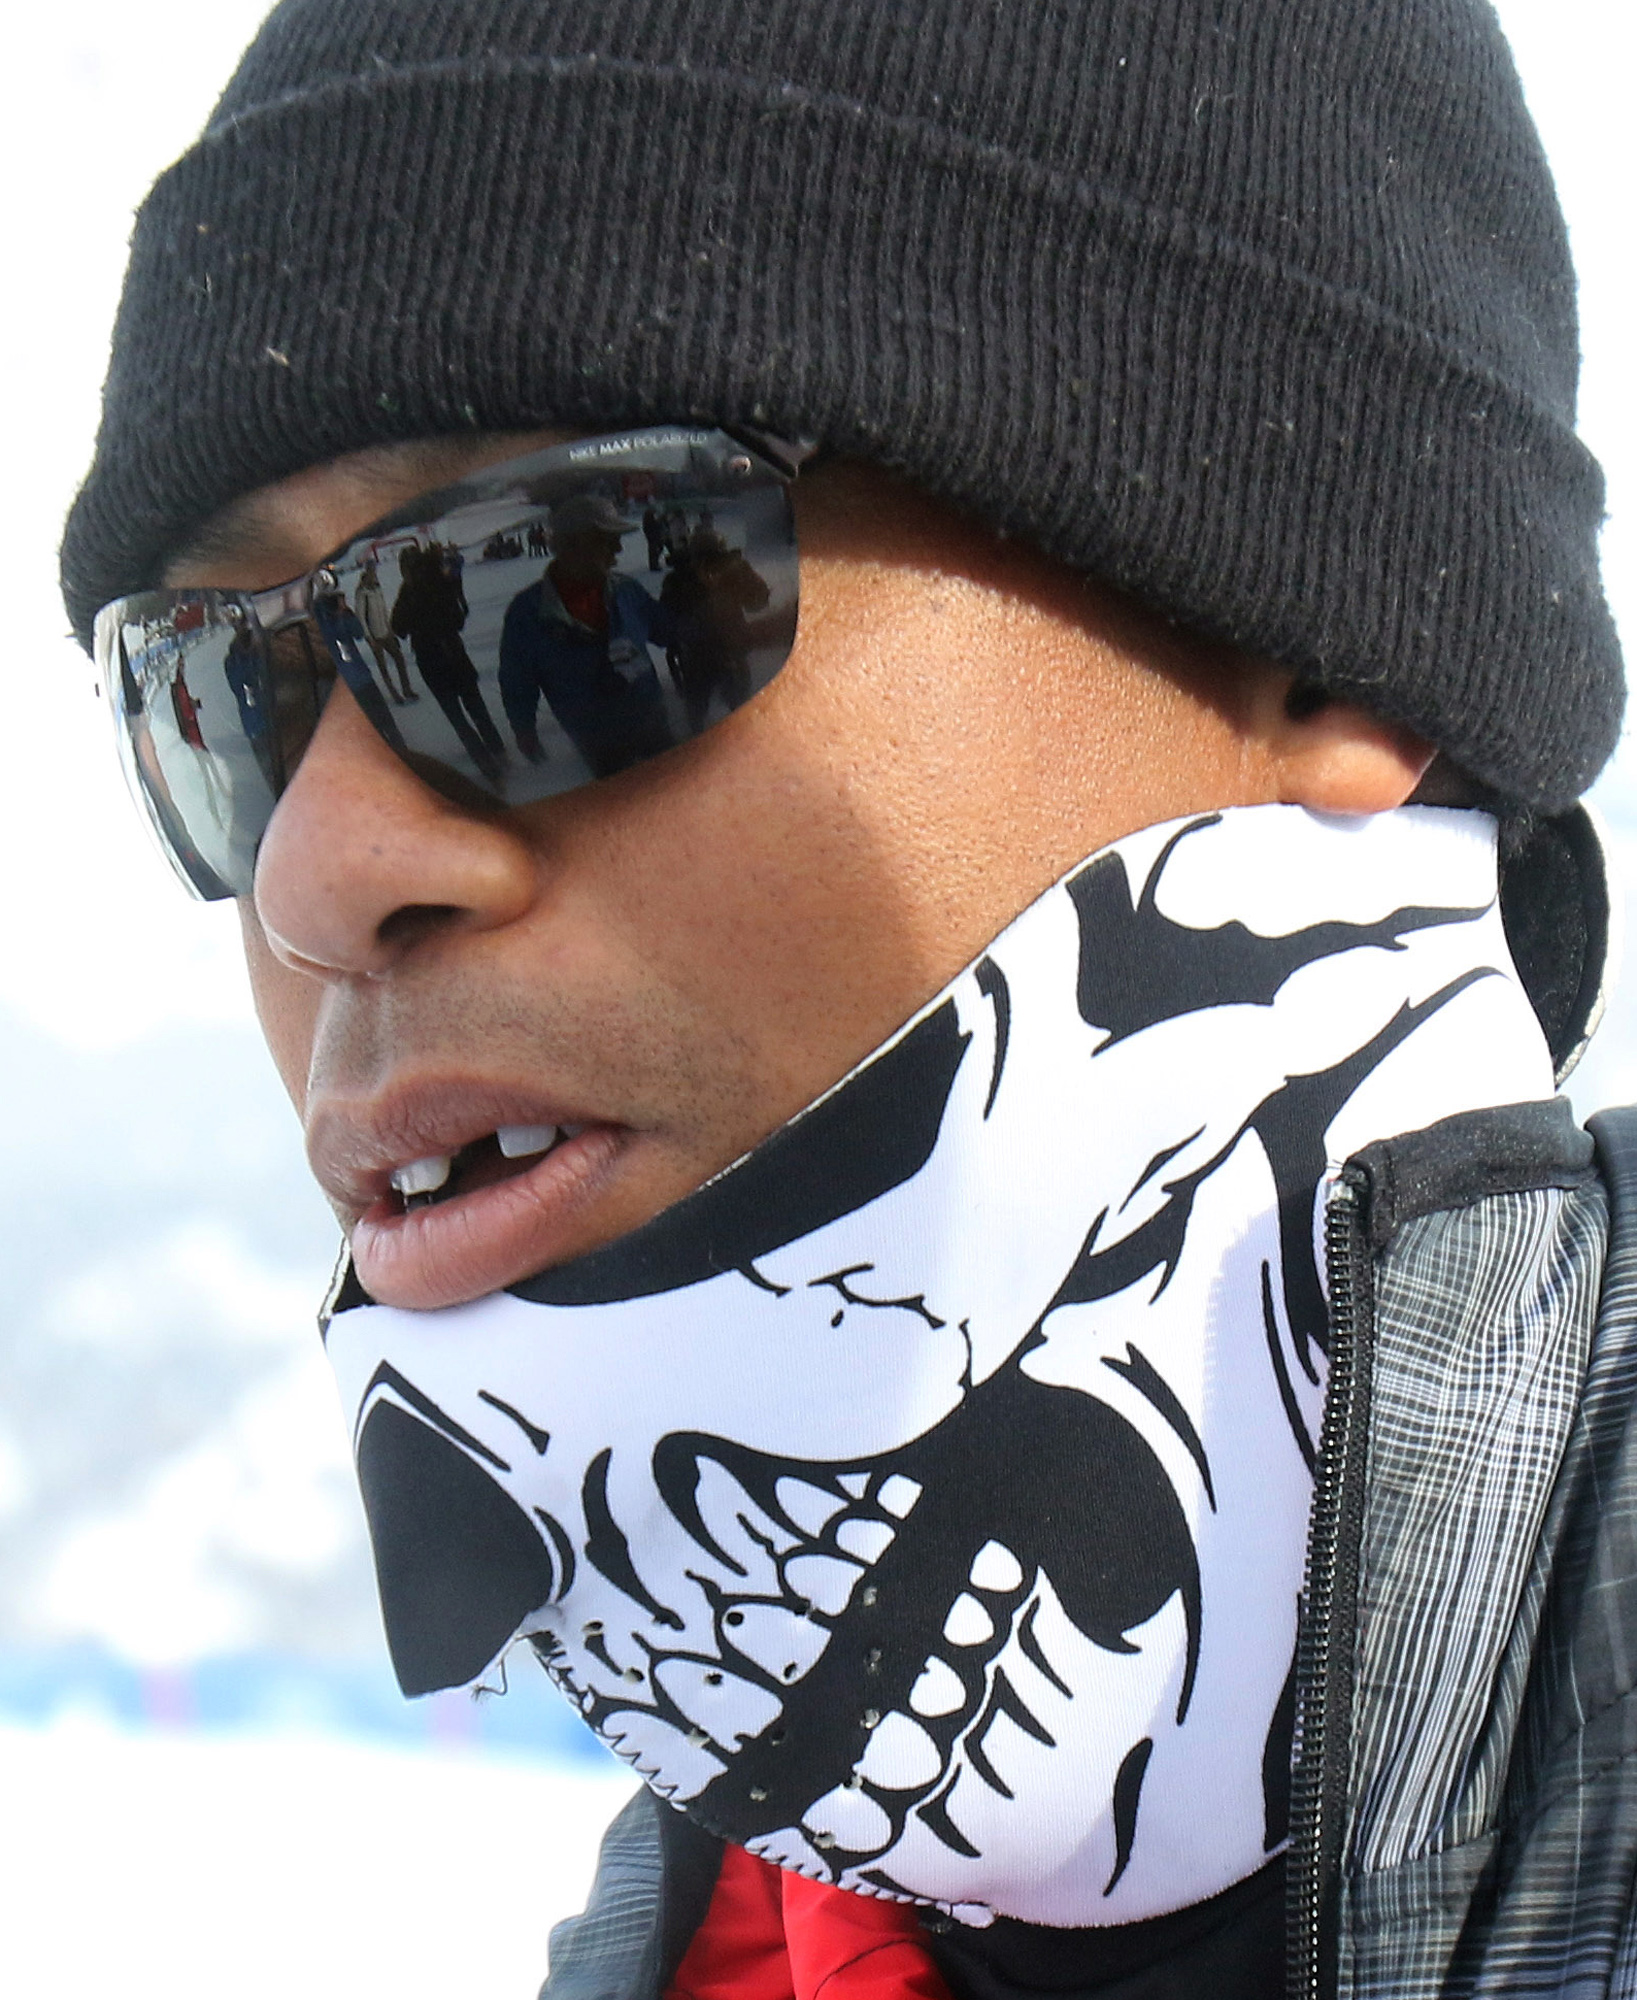 Tiger Woods walks in the finish area of an alpine ski, women's World Cup super-G, in Cortina d'Ampezzo, Italy, Monday, Jan. 19, 2015. Lindsey Vonn won a super-G Monday for her record 63rd World Cup victory and celebrated with an embrace from a surprise visitor boyfriend Tiger Woods. The American broke Annemarie Moser-Proell's 35-year-old record of 62 World Cup wins with a flawless run down the Olympia delle Tofane course, finishing 0.85 ahead of Anna Fenninger of Austria. (AP Photo/Armando Trovati)